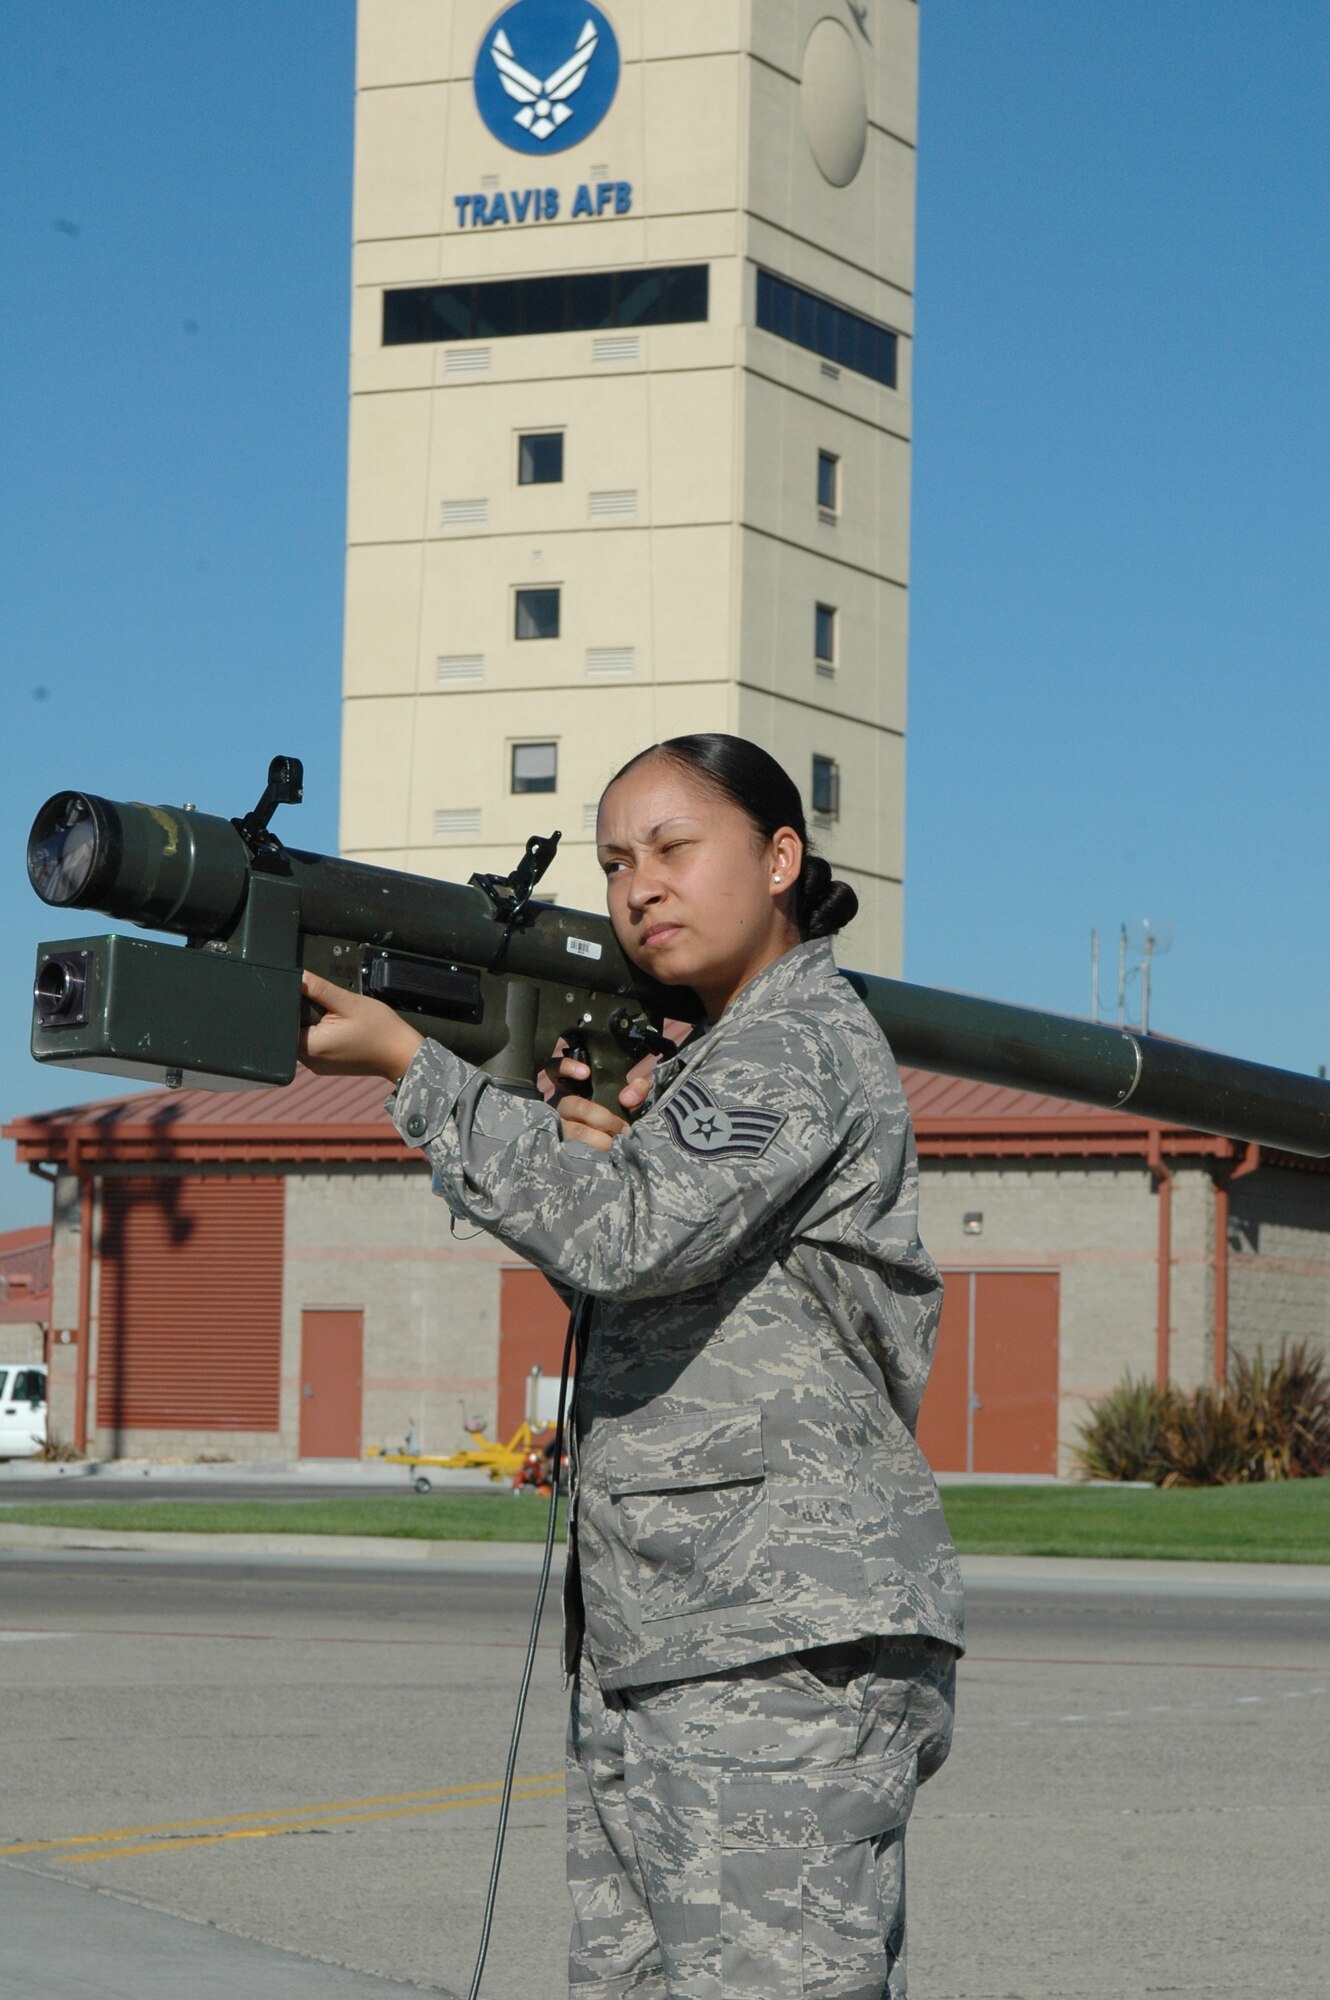 Staff Sgt. Tiffany Scott, 60th Operations Support Squadron combat weather forecaster, simulates using a Man Portable Air Defense System on the flightline Sept. 24. The simulation allowed Travis members a chance to learn first-hand about some of the most dangerous and prevalent threats to mobility aircraft around the world and gain a better understanding of these threats in accomplishing their mission. (U.S. Air Force photo/Tech. Sgt. Donald Osborn)  